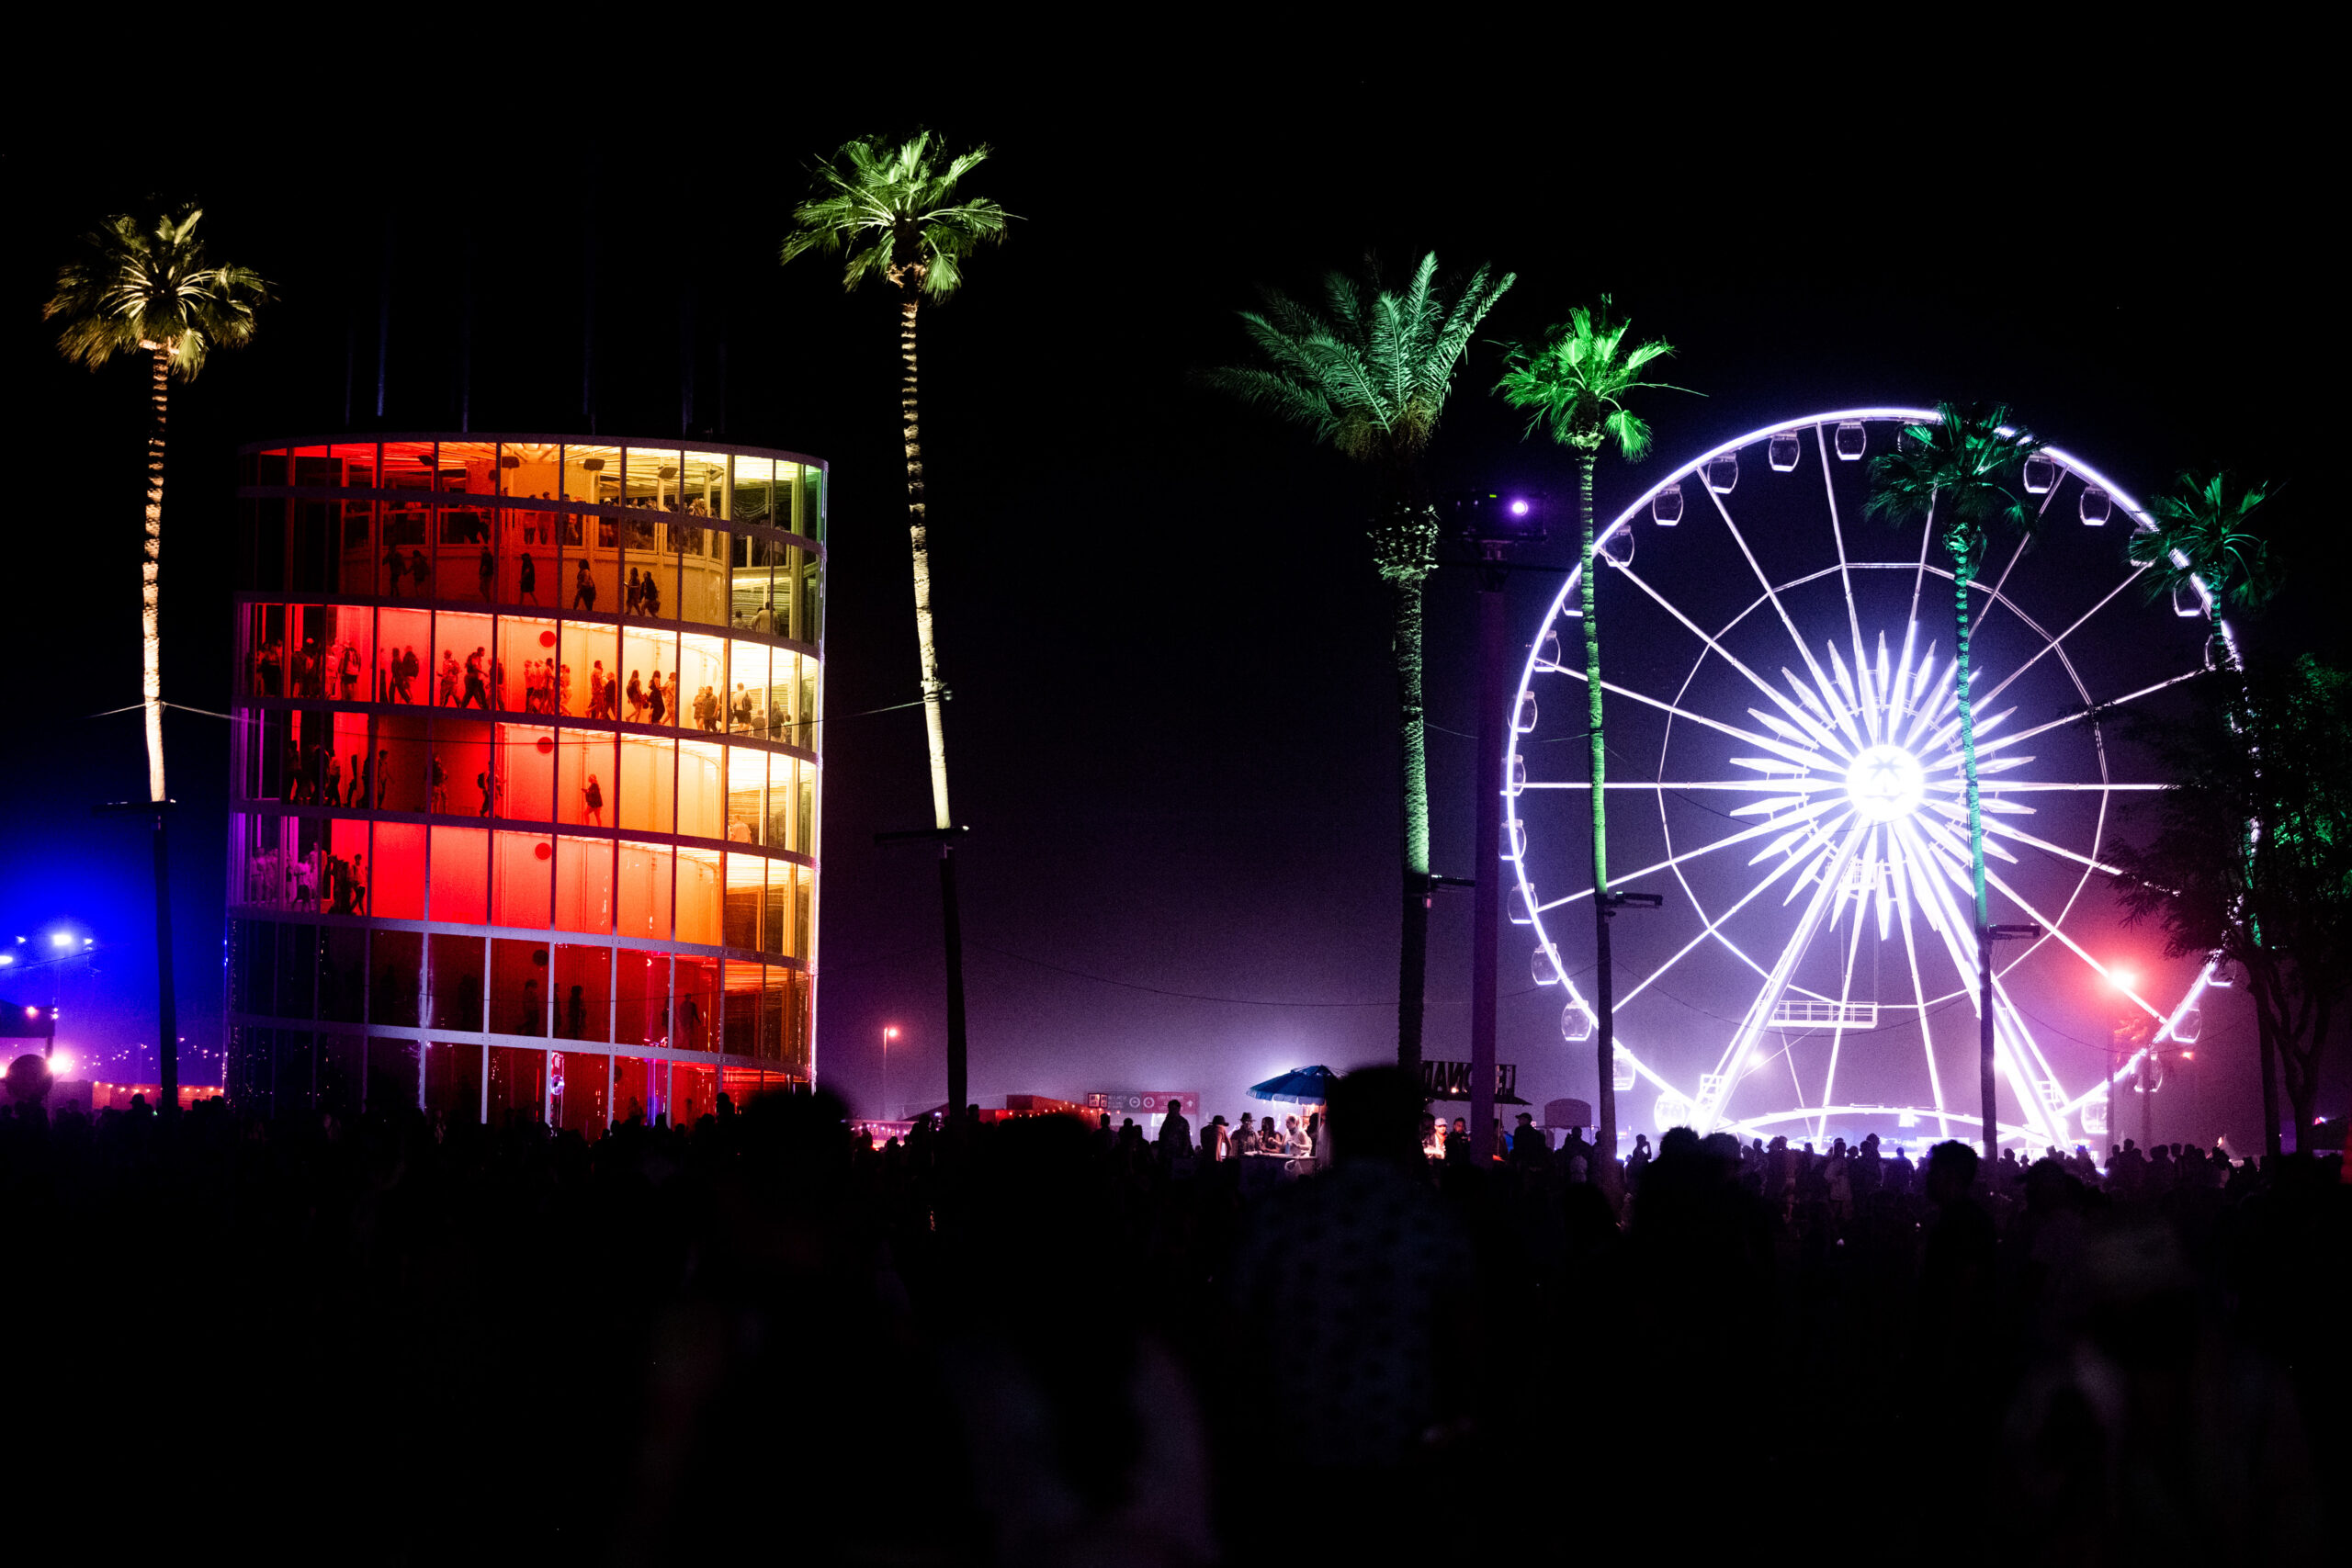 Coachella: Gorillaz, Blondie, the Weeknd's Surprise, and More Highlights From Day 1